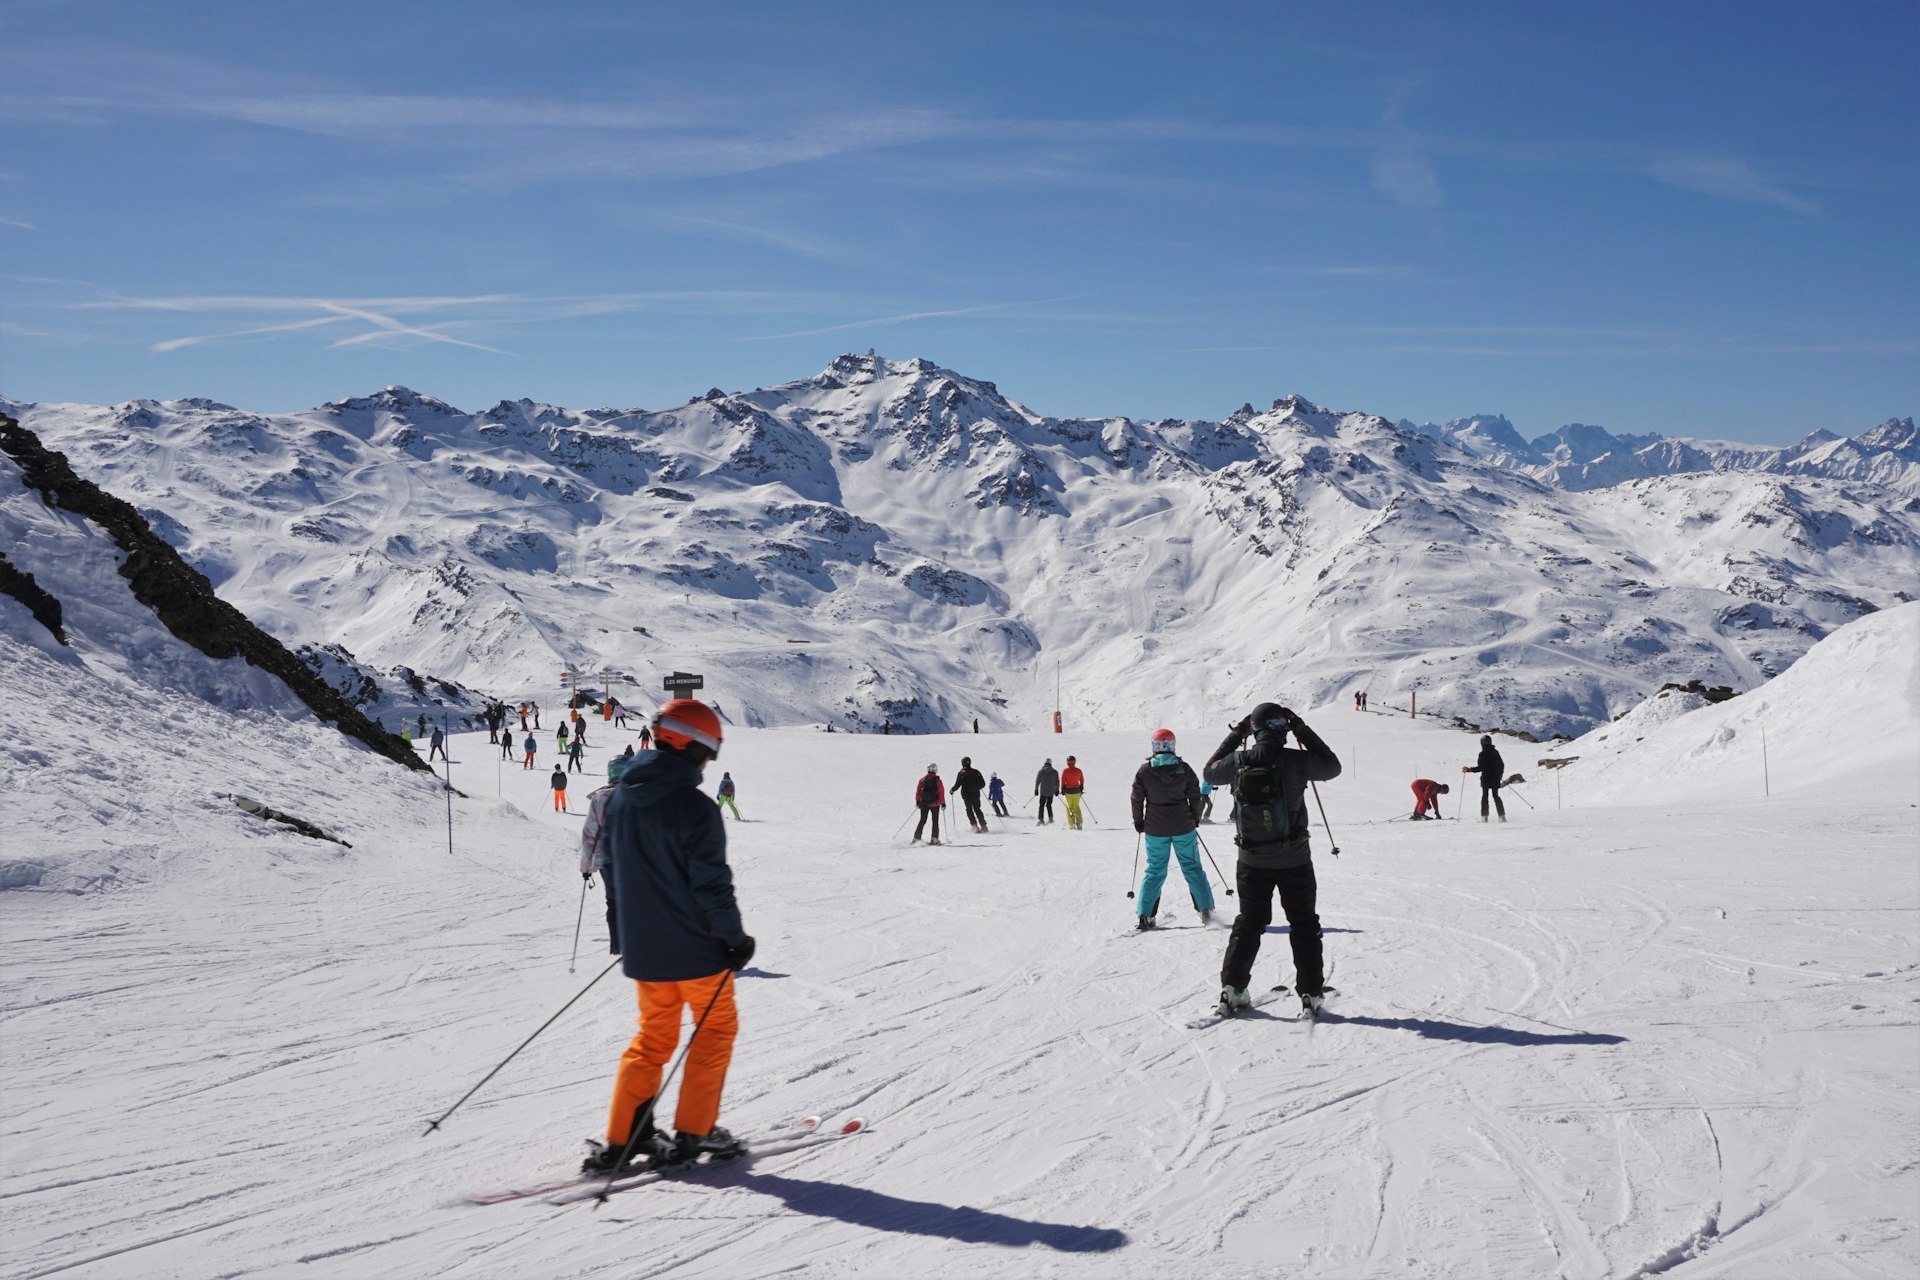 Many people skiing down a piste at Les Menuires in the Trois Vallées (Three Valleys) area in France, on a bright, sunny day